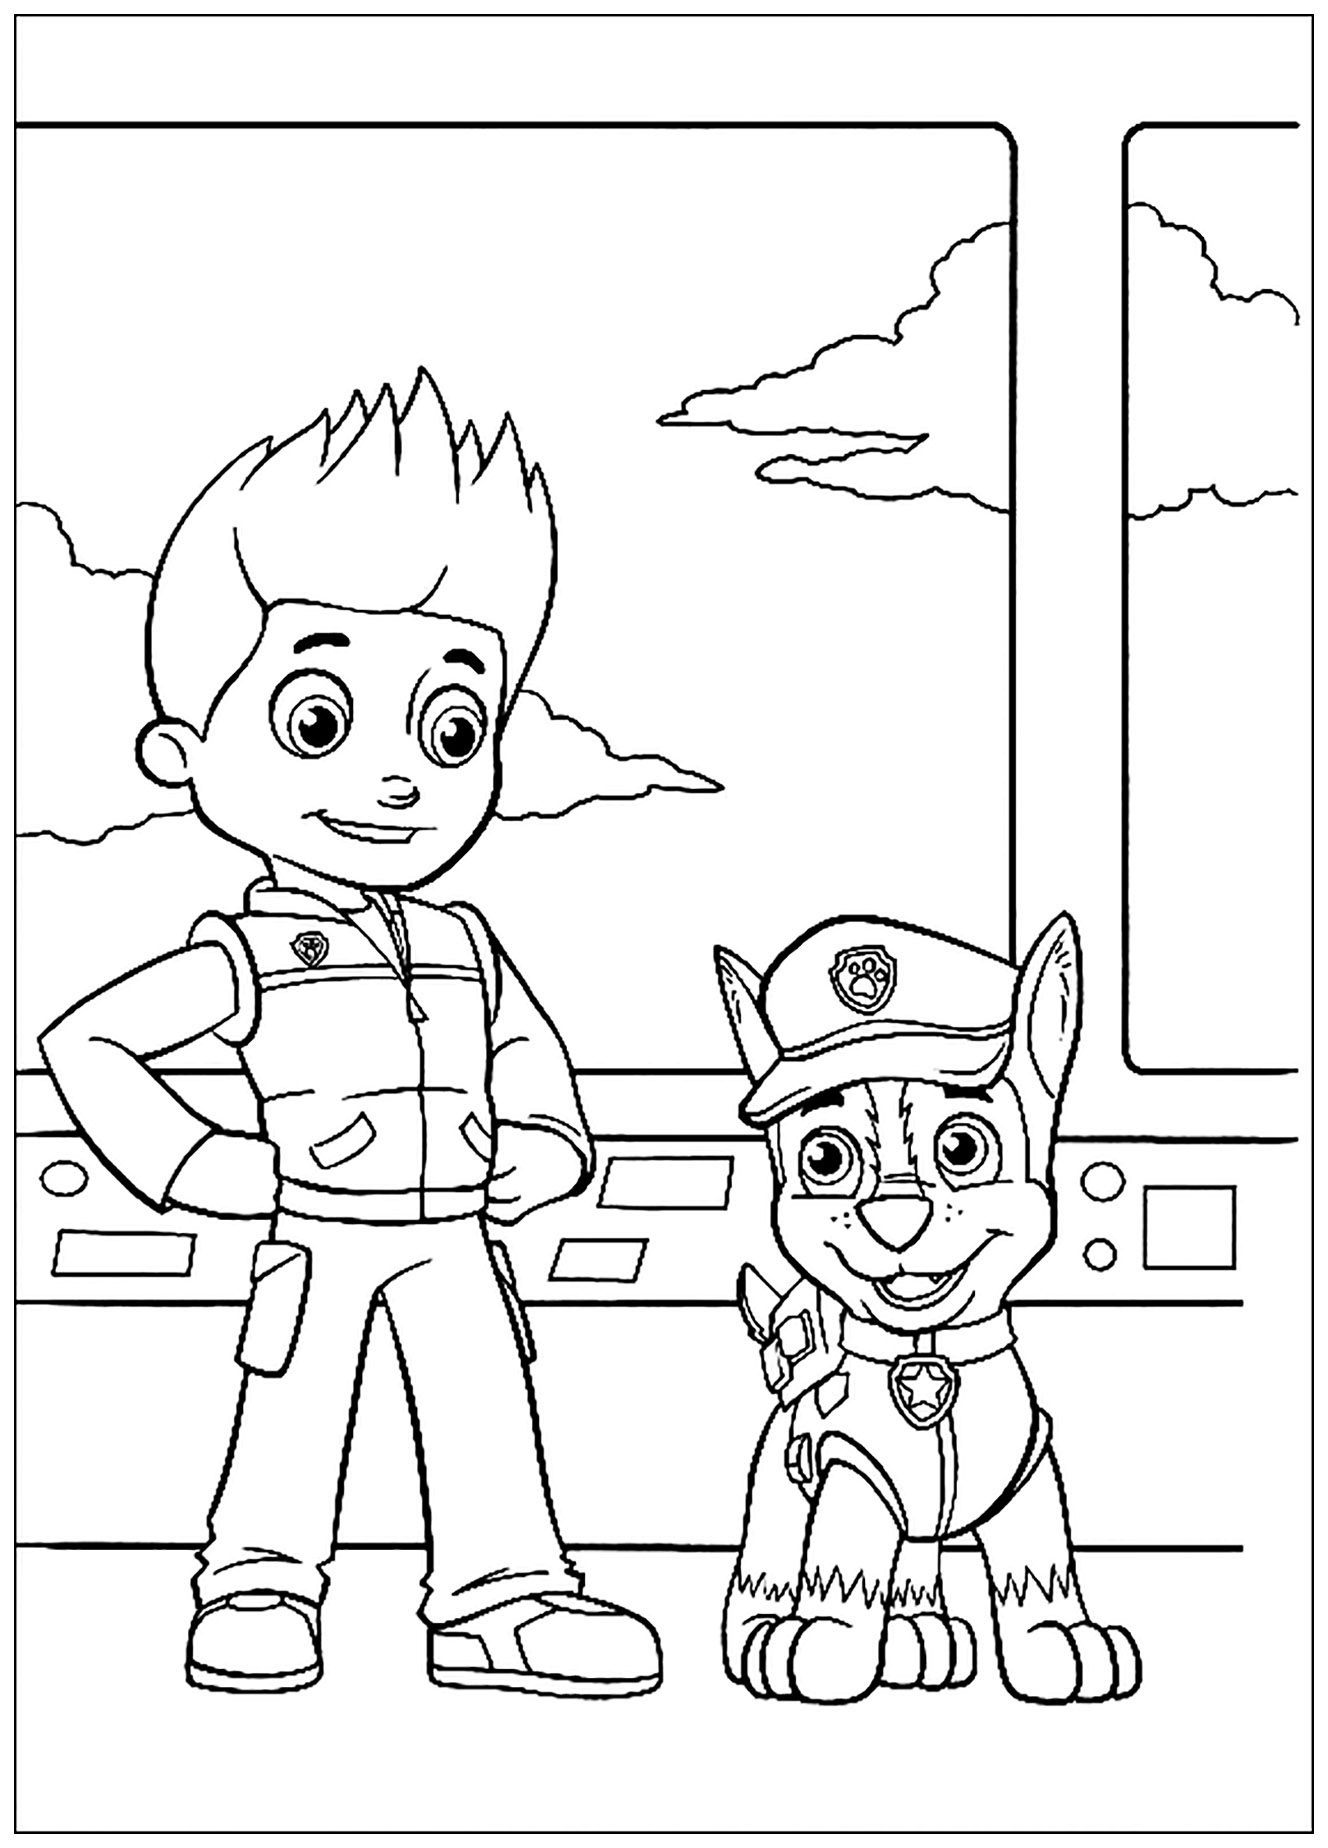 Patrol image to print and color: Ryder and Chase the German Shepherd